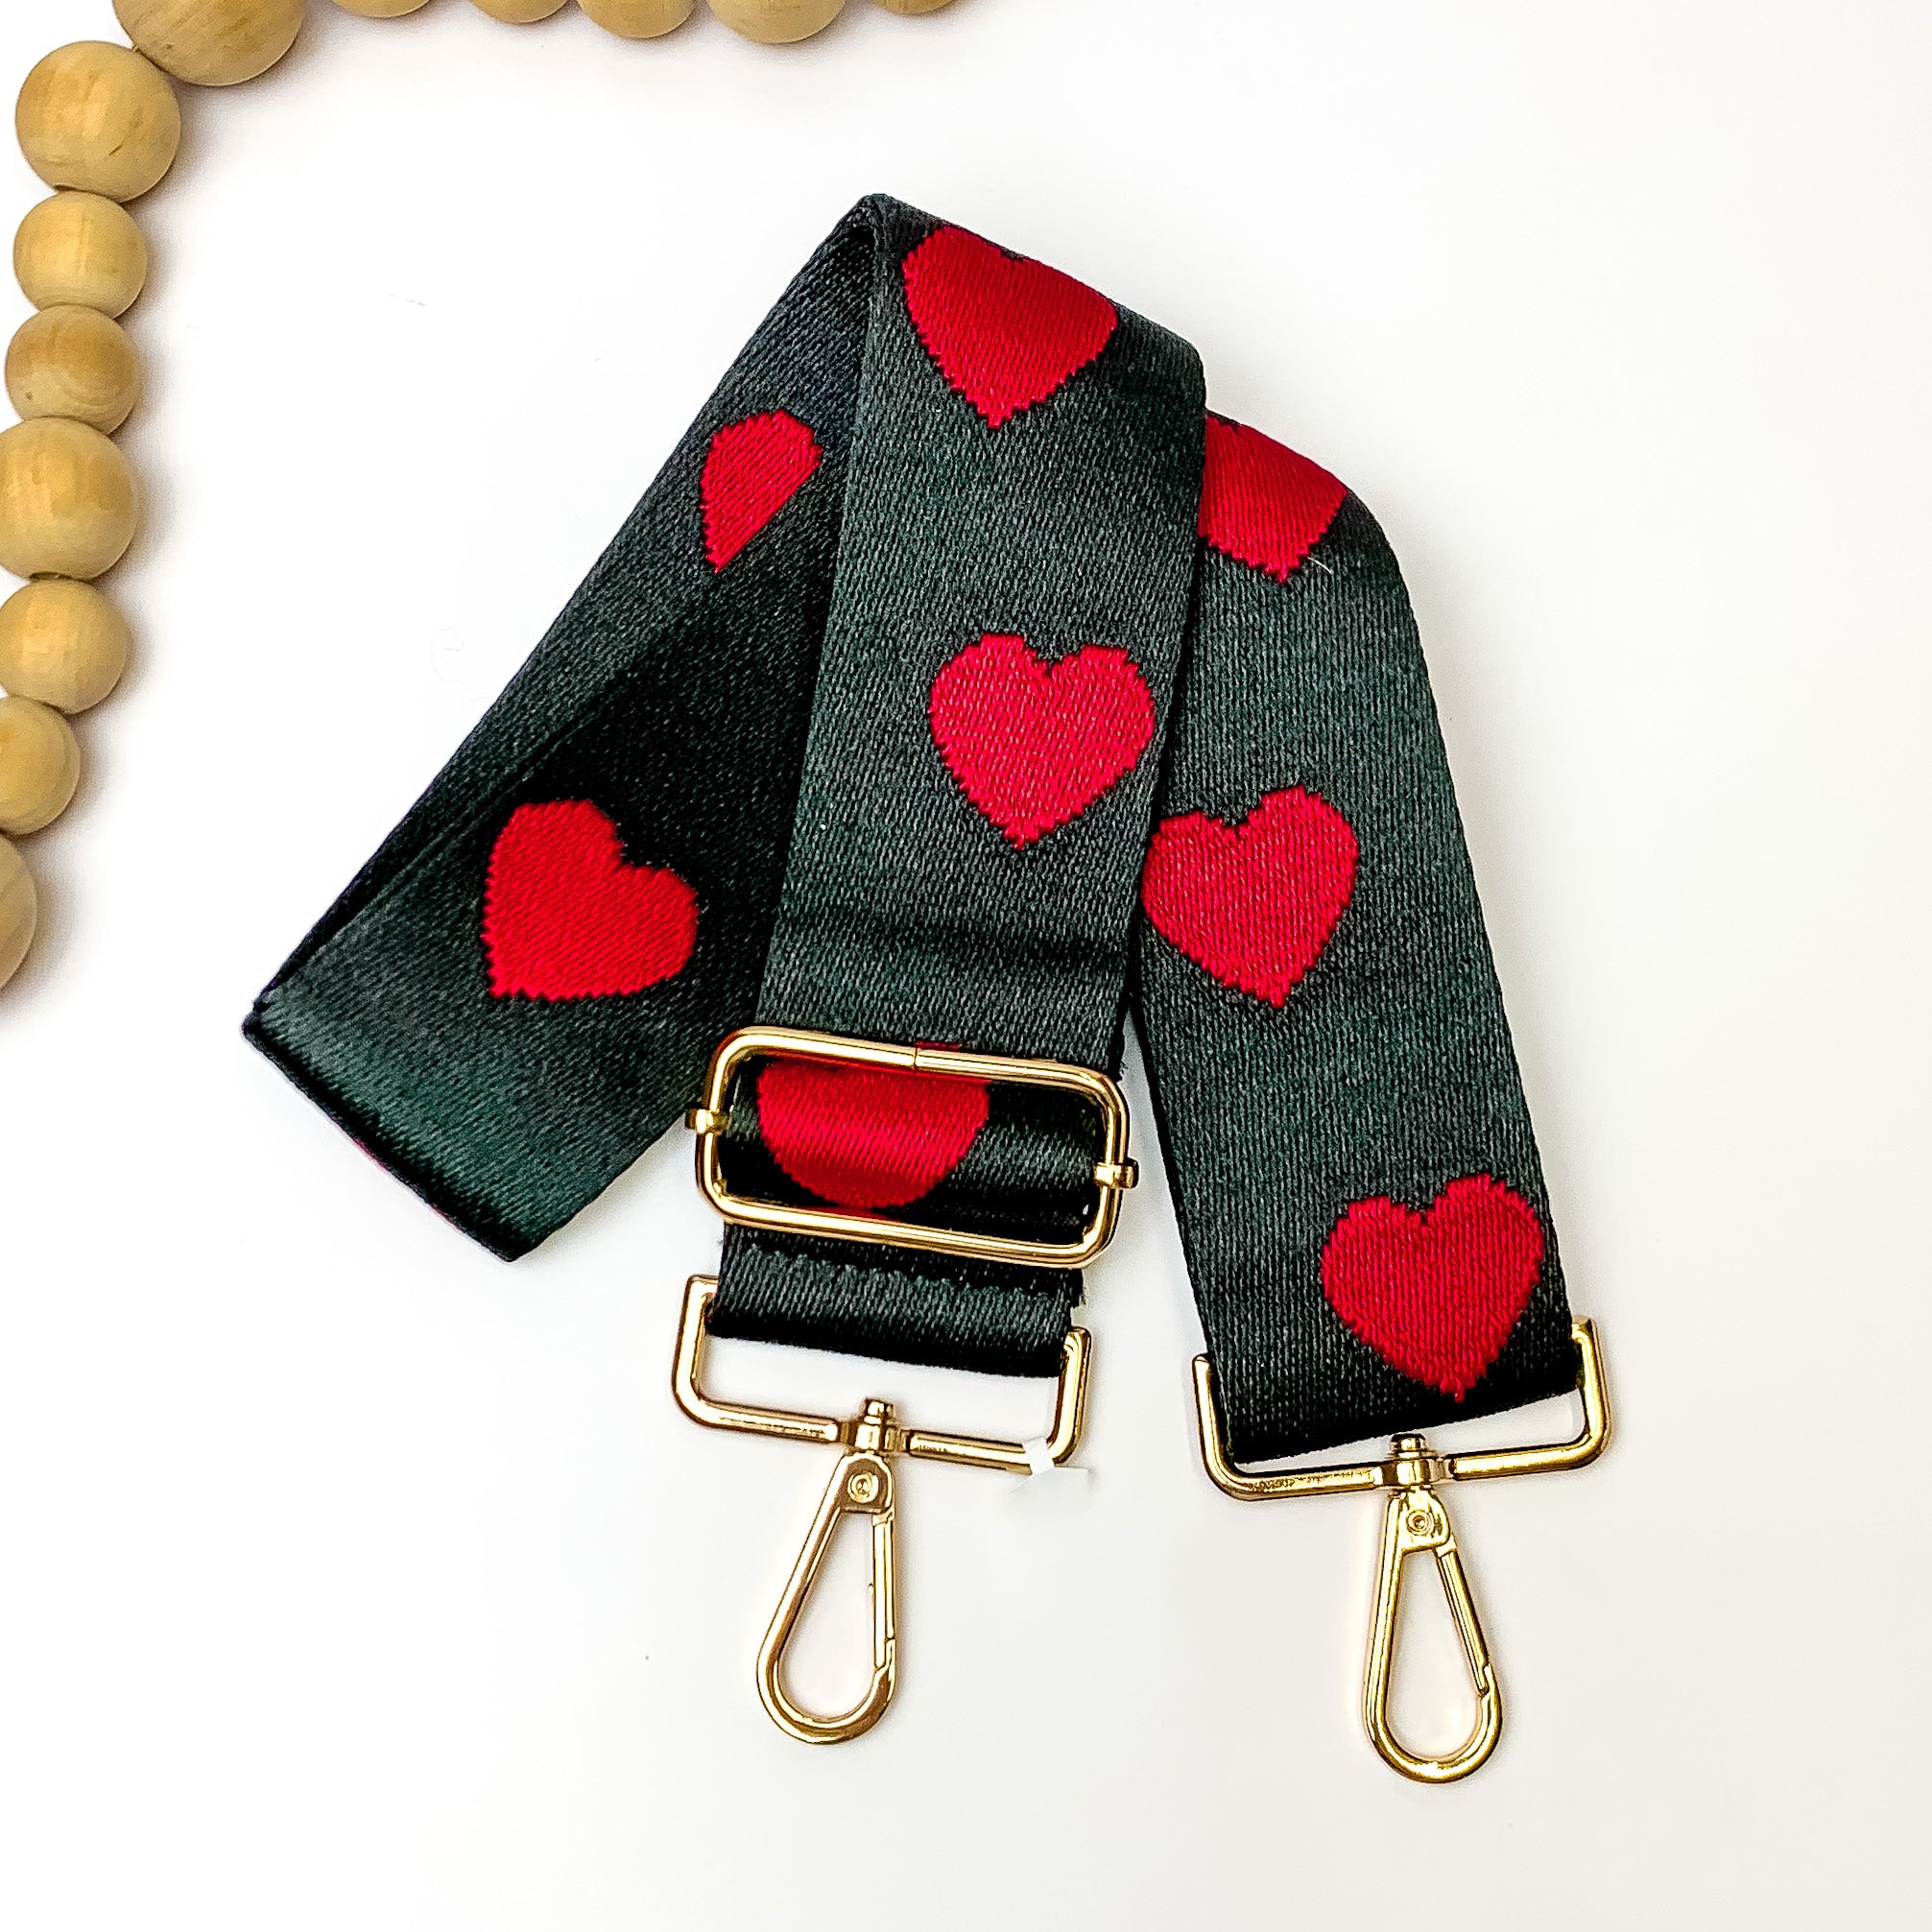 Black purse strap with a red heart design. This purse strap includes gold hardware. This purse strap os pictured on a white background with tan beads in the top left corner. 